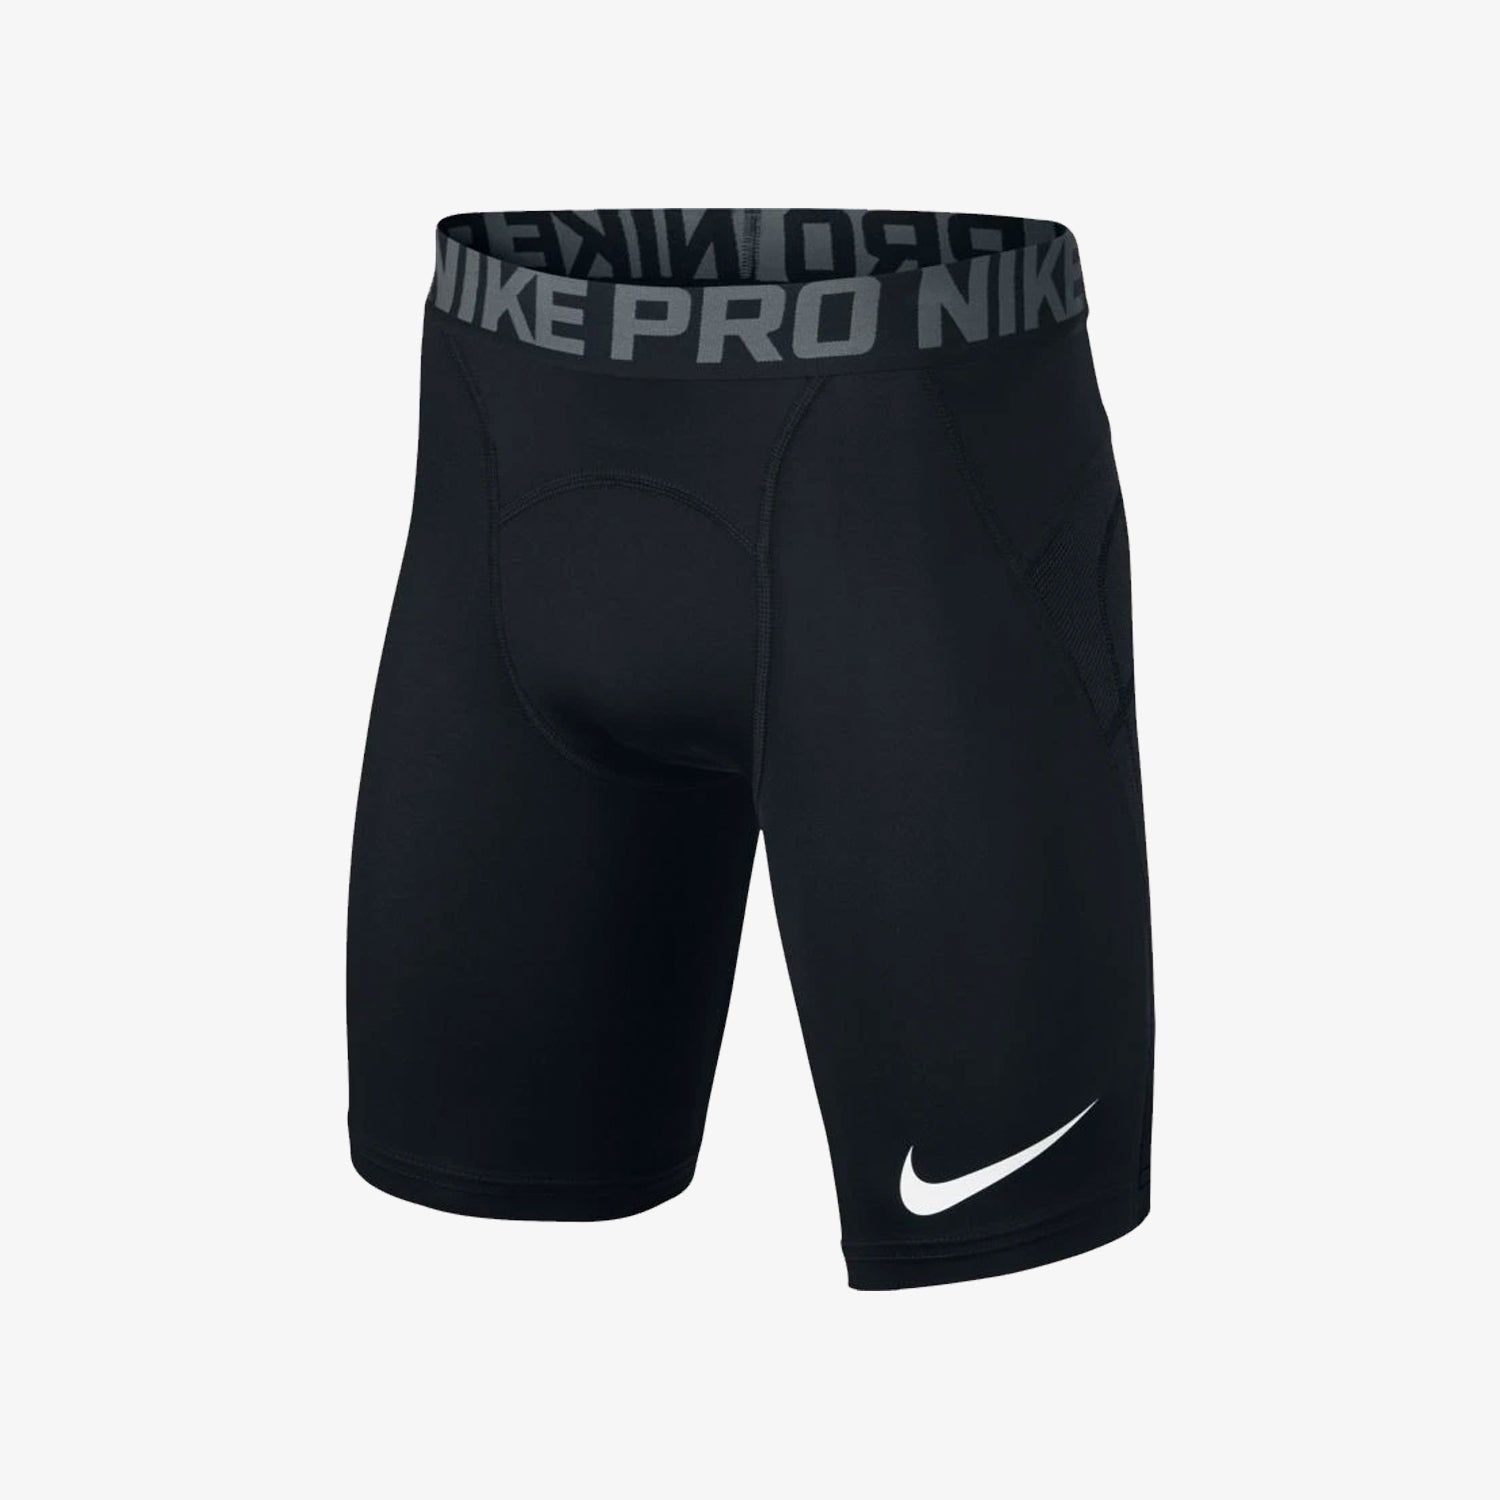 Nike Pro Youth Heist Compression Short - Niky's Sports